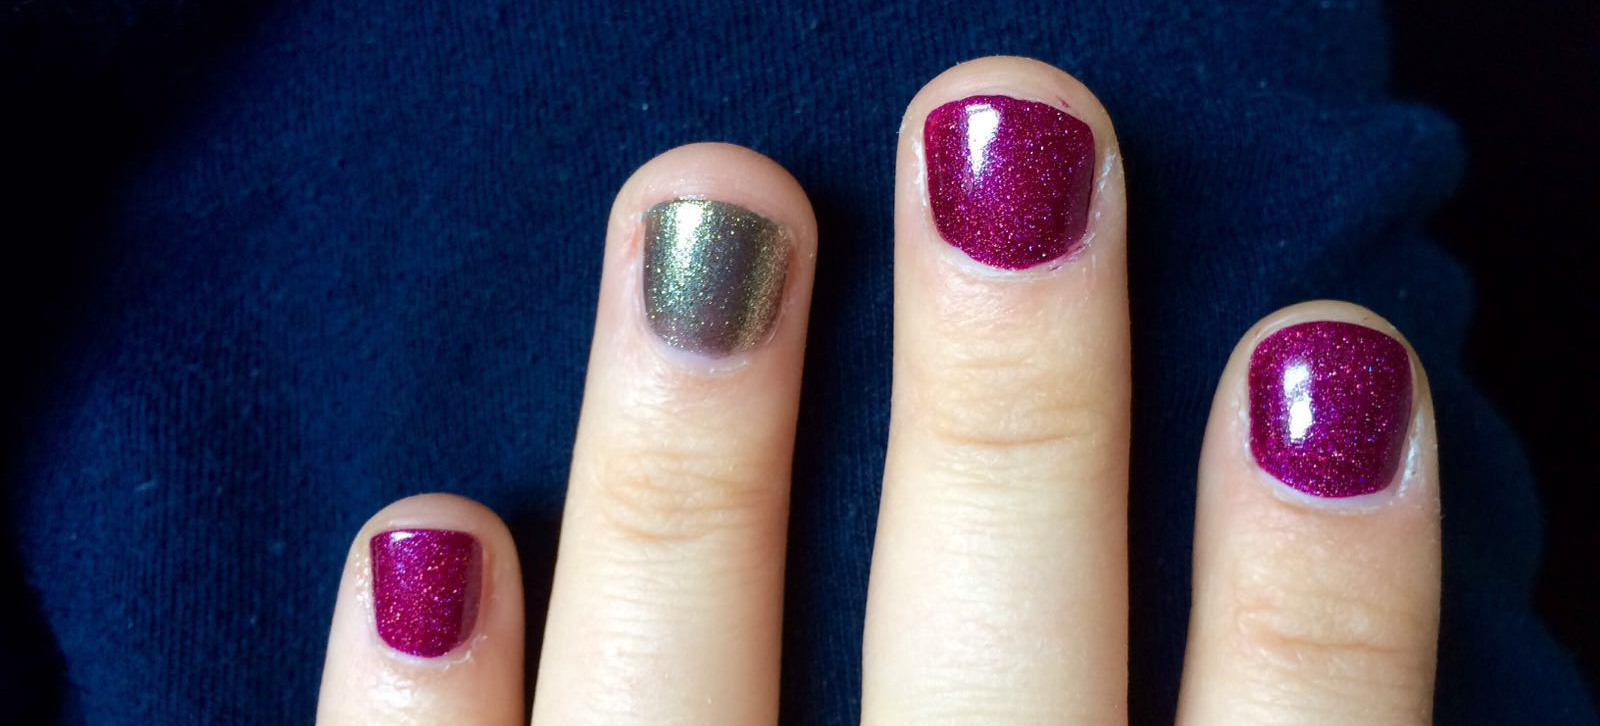 4. Gel Nails vs Shellac Nails: What's the Difference? - wide 5